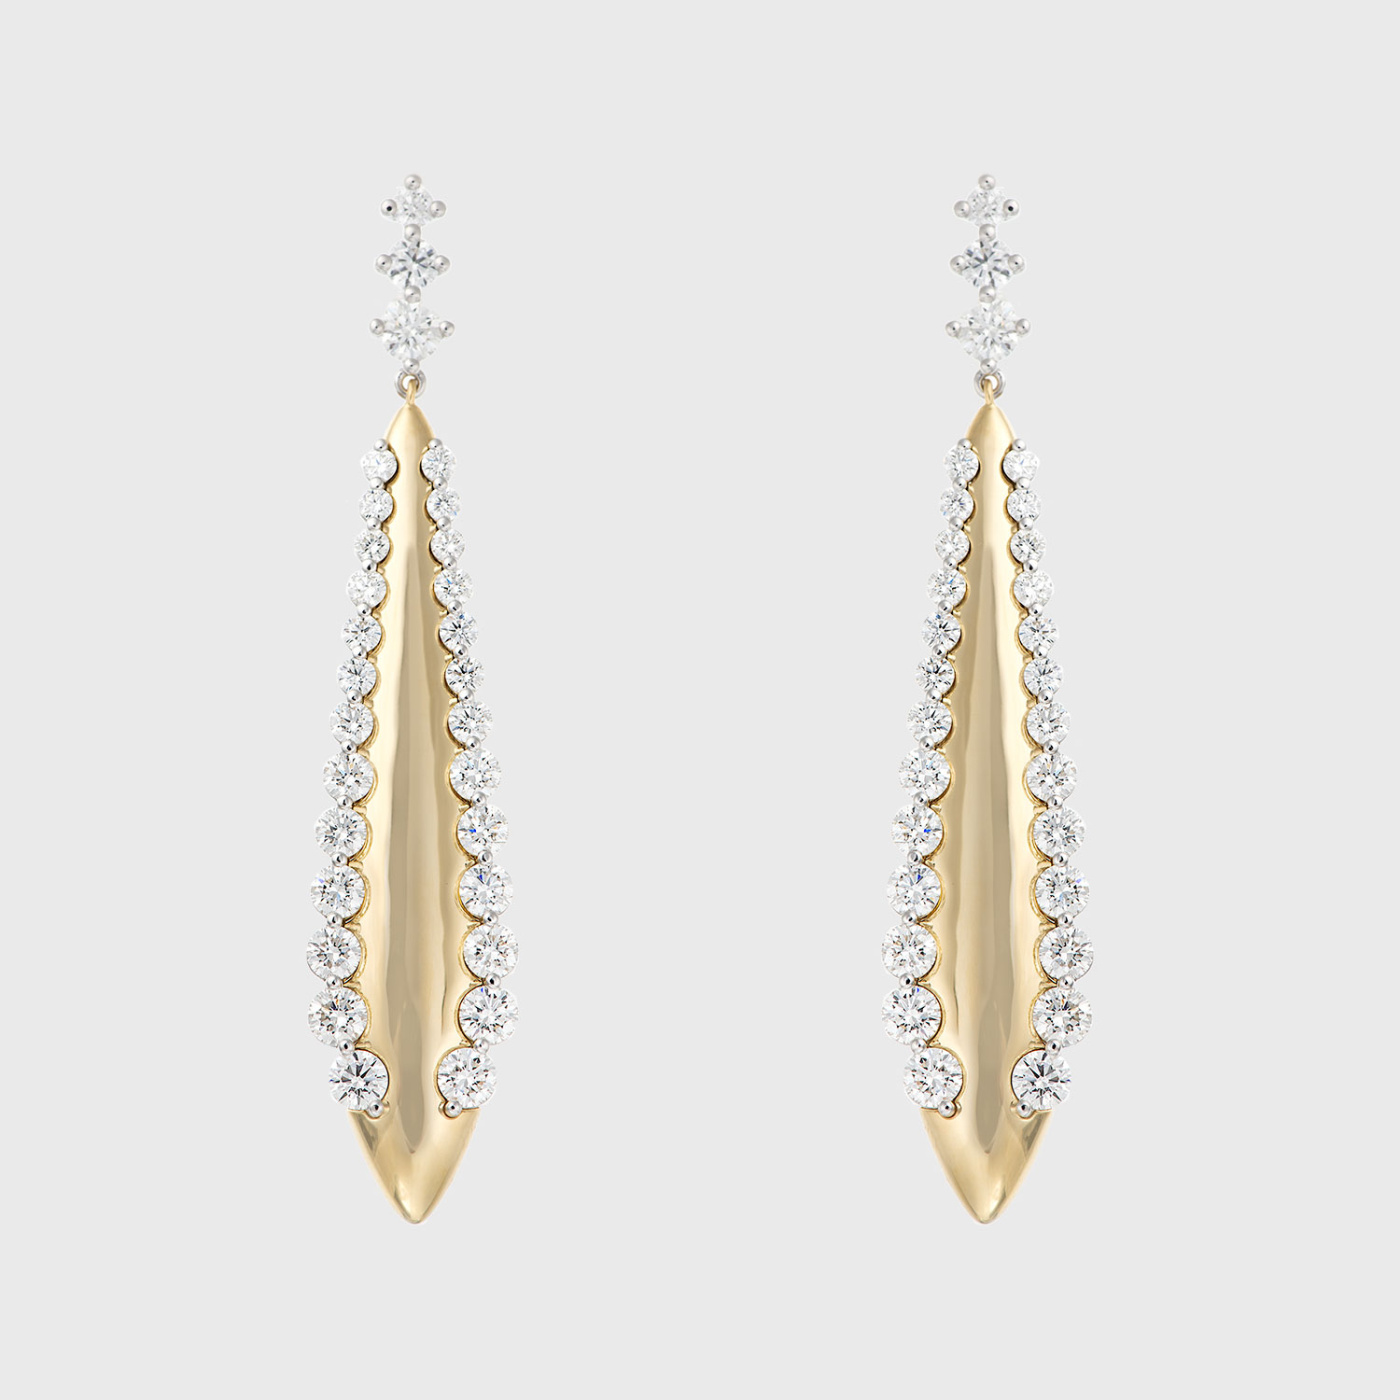 Yellow gold earrings with round white diamonds